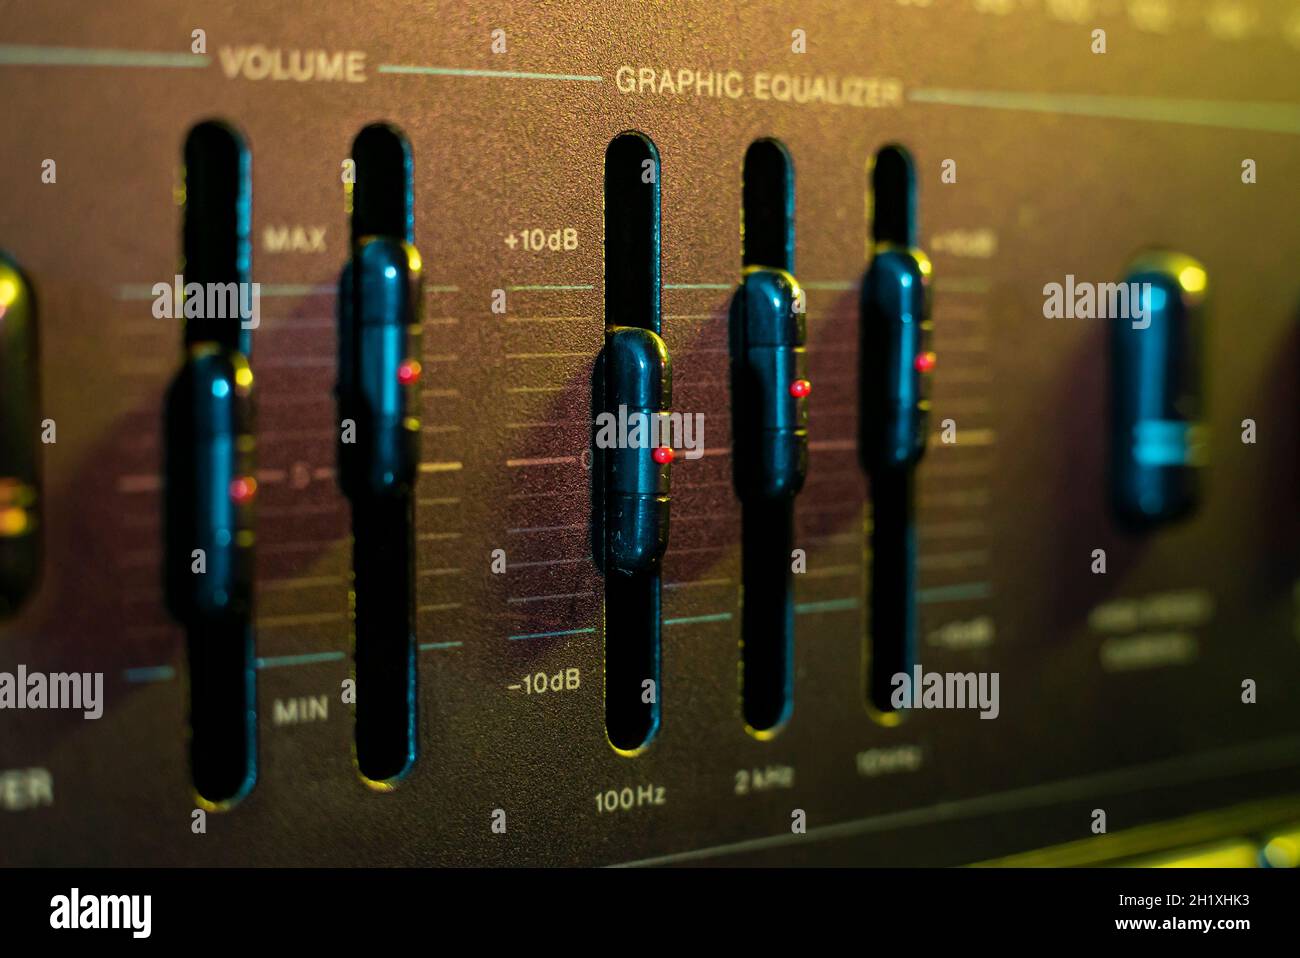 Volume and equalizer controller detail in an old stereo equipment Stock  Photo - Alamy